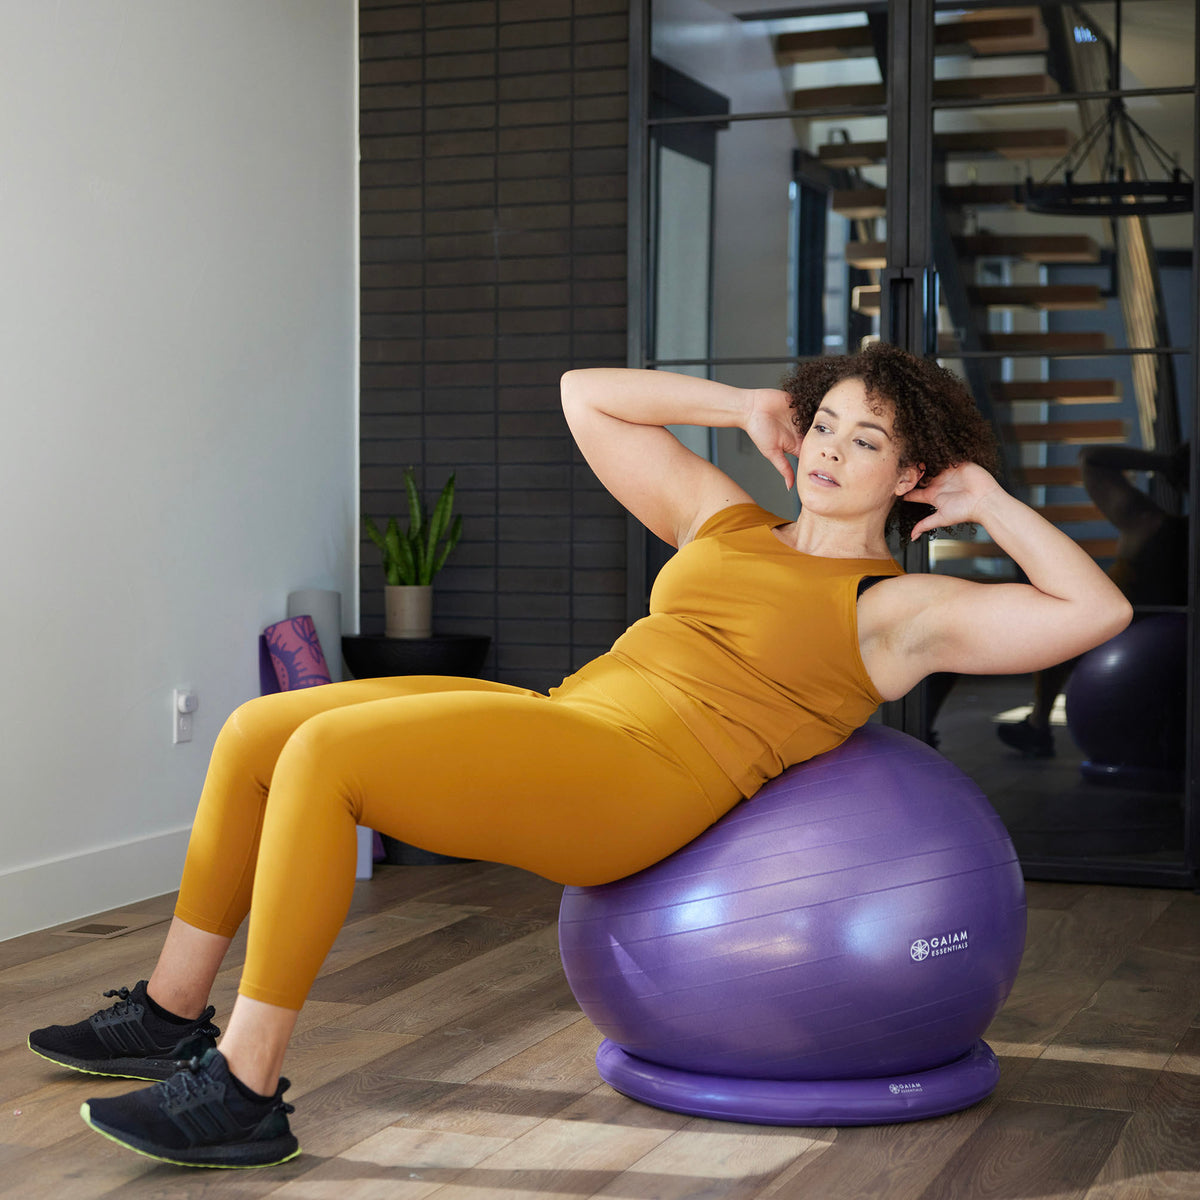 Woman doing crunches on Essentials Balance Ball and Base